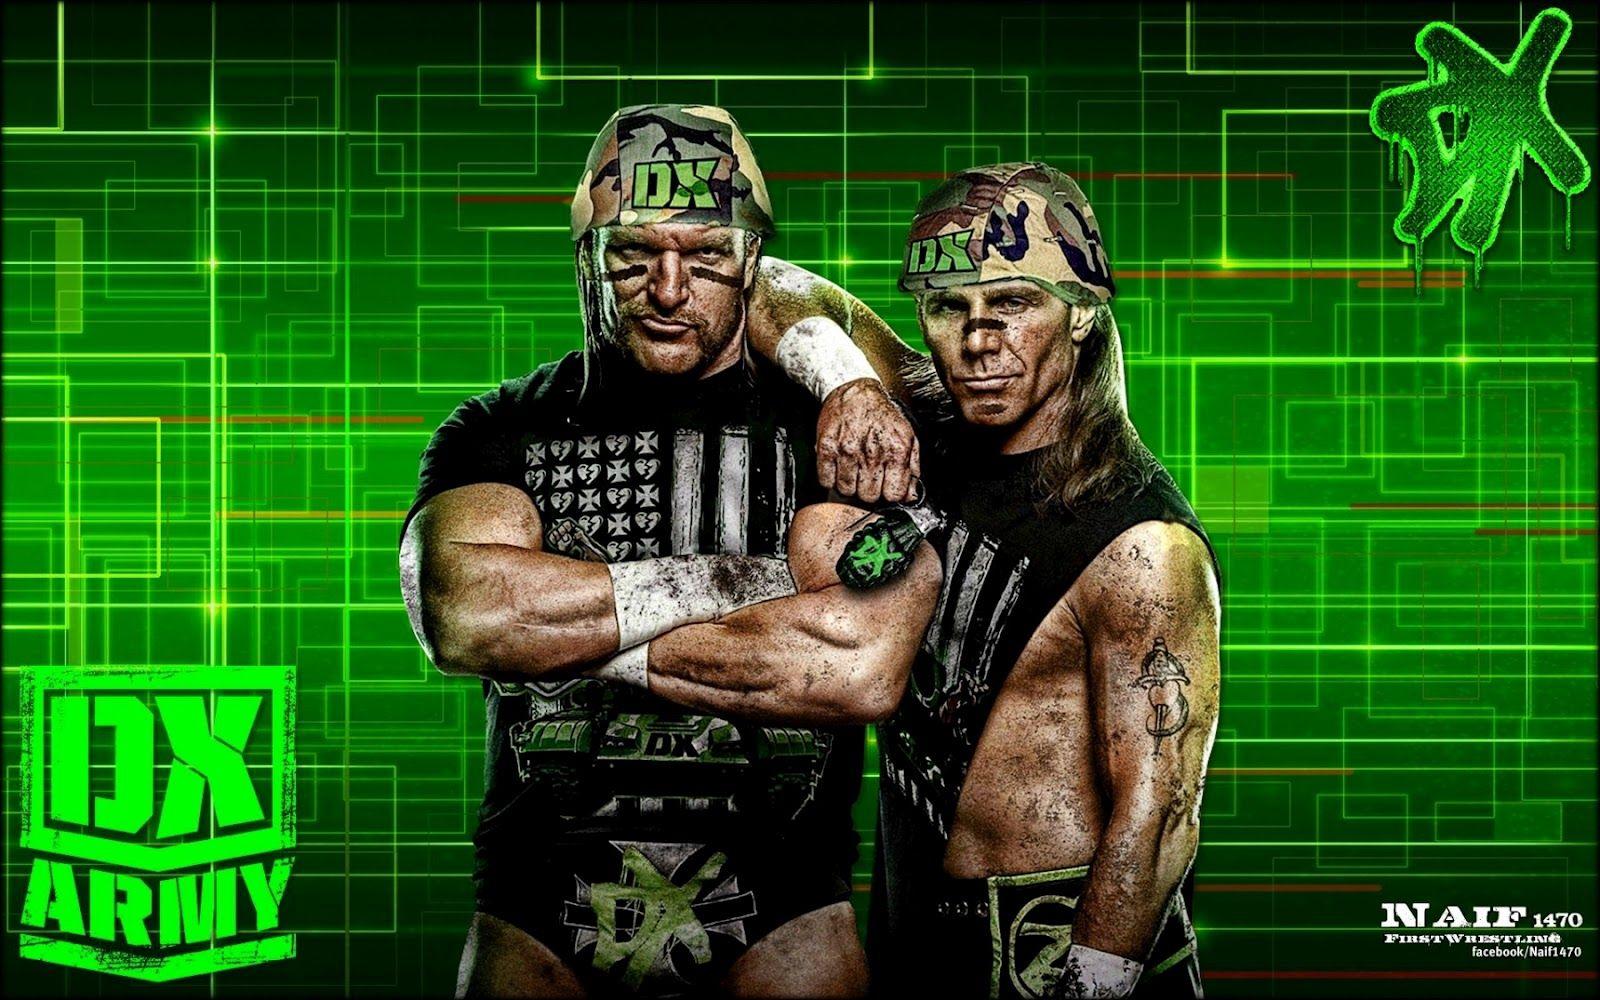 Hhh Dx WWE Wallpapers - Wallpaper Cave